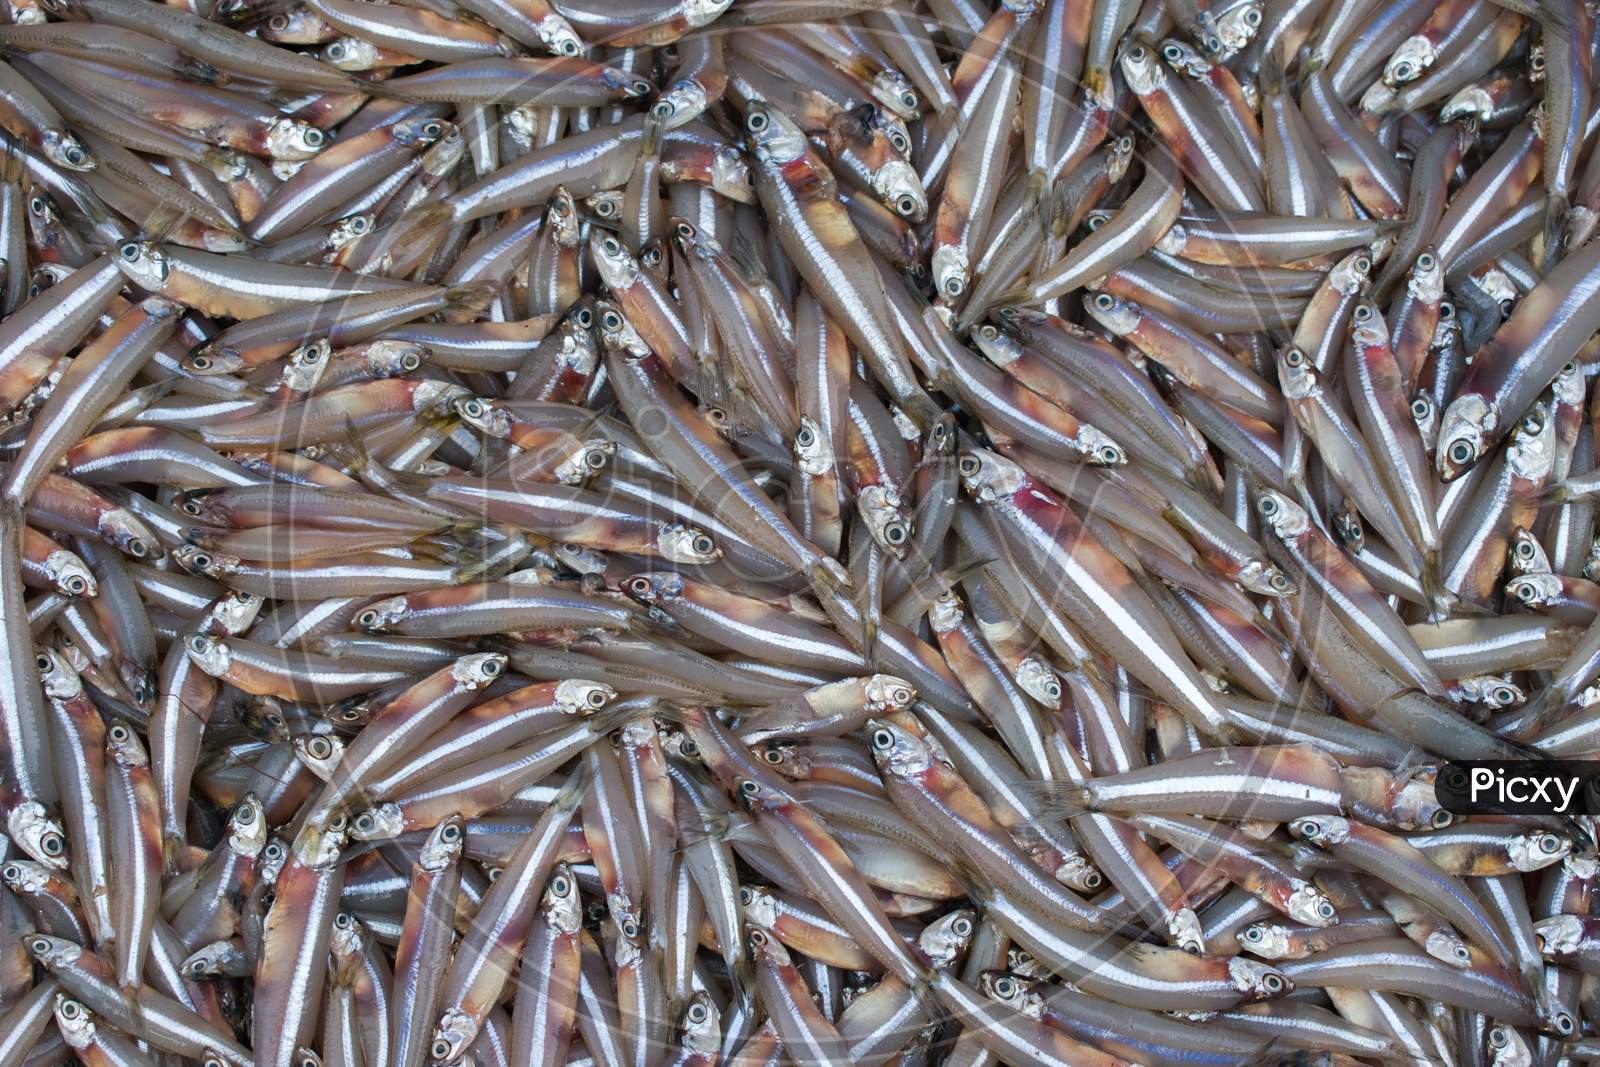 Anchoviella Lepidentostole Fish Background, Brazilian Fish For Sale In The Market, Mangalore Harbour,India.